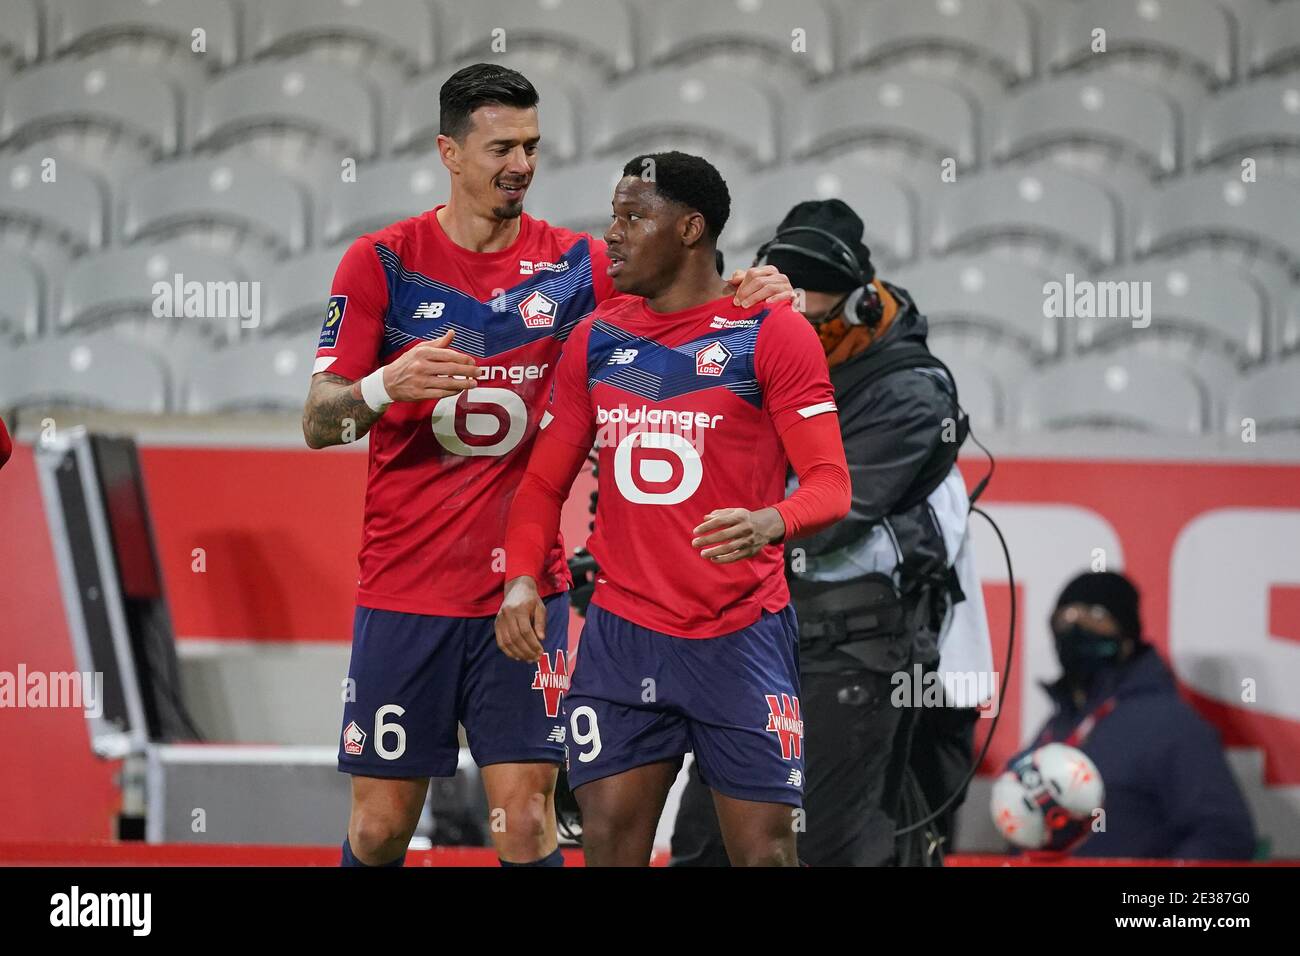 LILLE, FRANCE - JANUARY 17: Jose Fonte of Lille OSC, Jonathan David of  Lille OSC after the 2-1 during the Ligue 1 match between Lille OSC and  Stade Reims at Stade Pierre